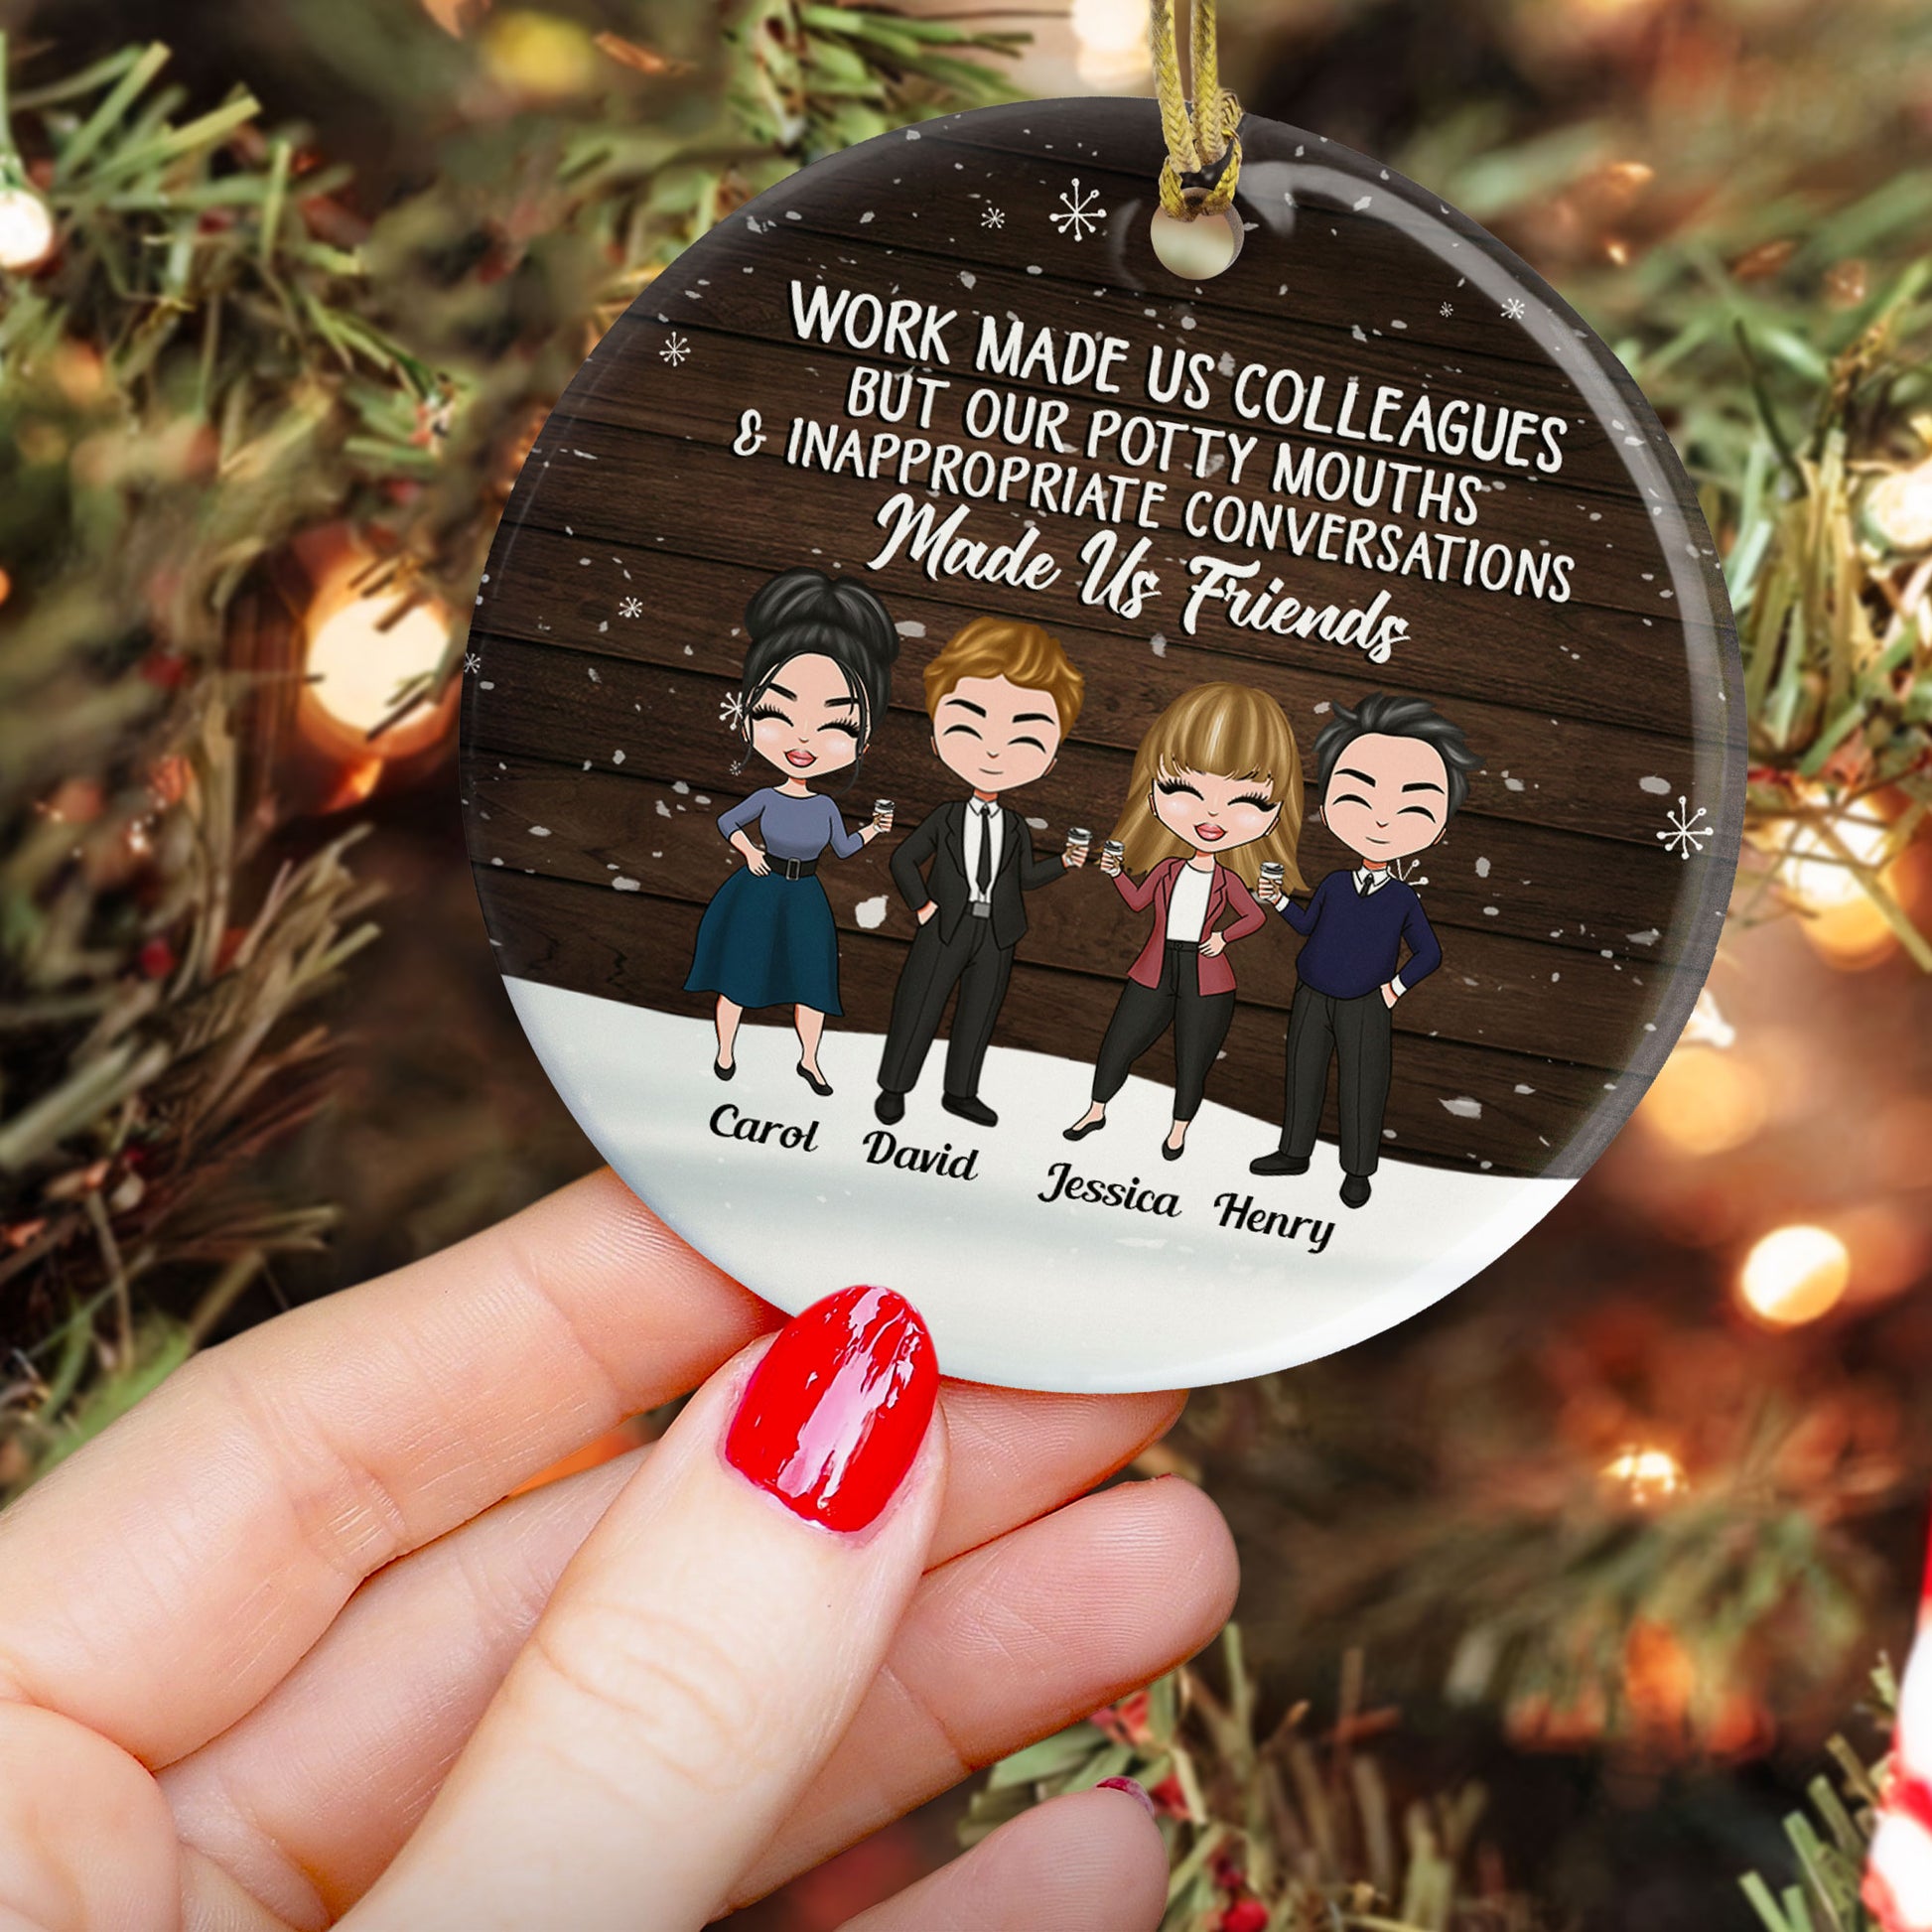 Our Potty Mouths Made Us Friends - Personalized Ceramic Ornament - Christmas Gift For Colleagues